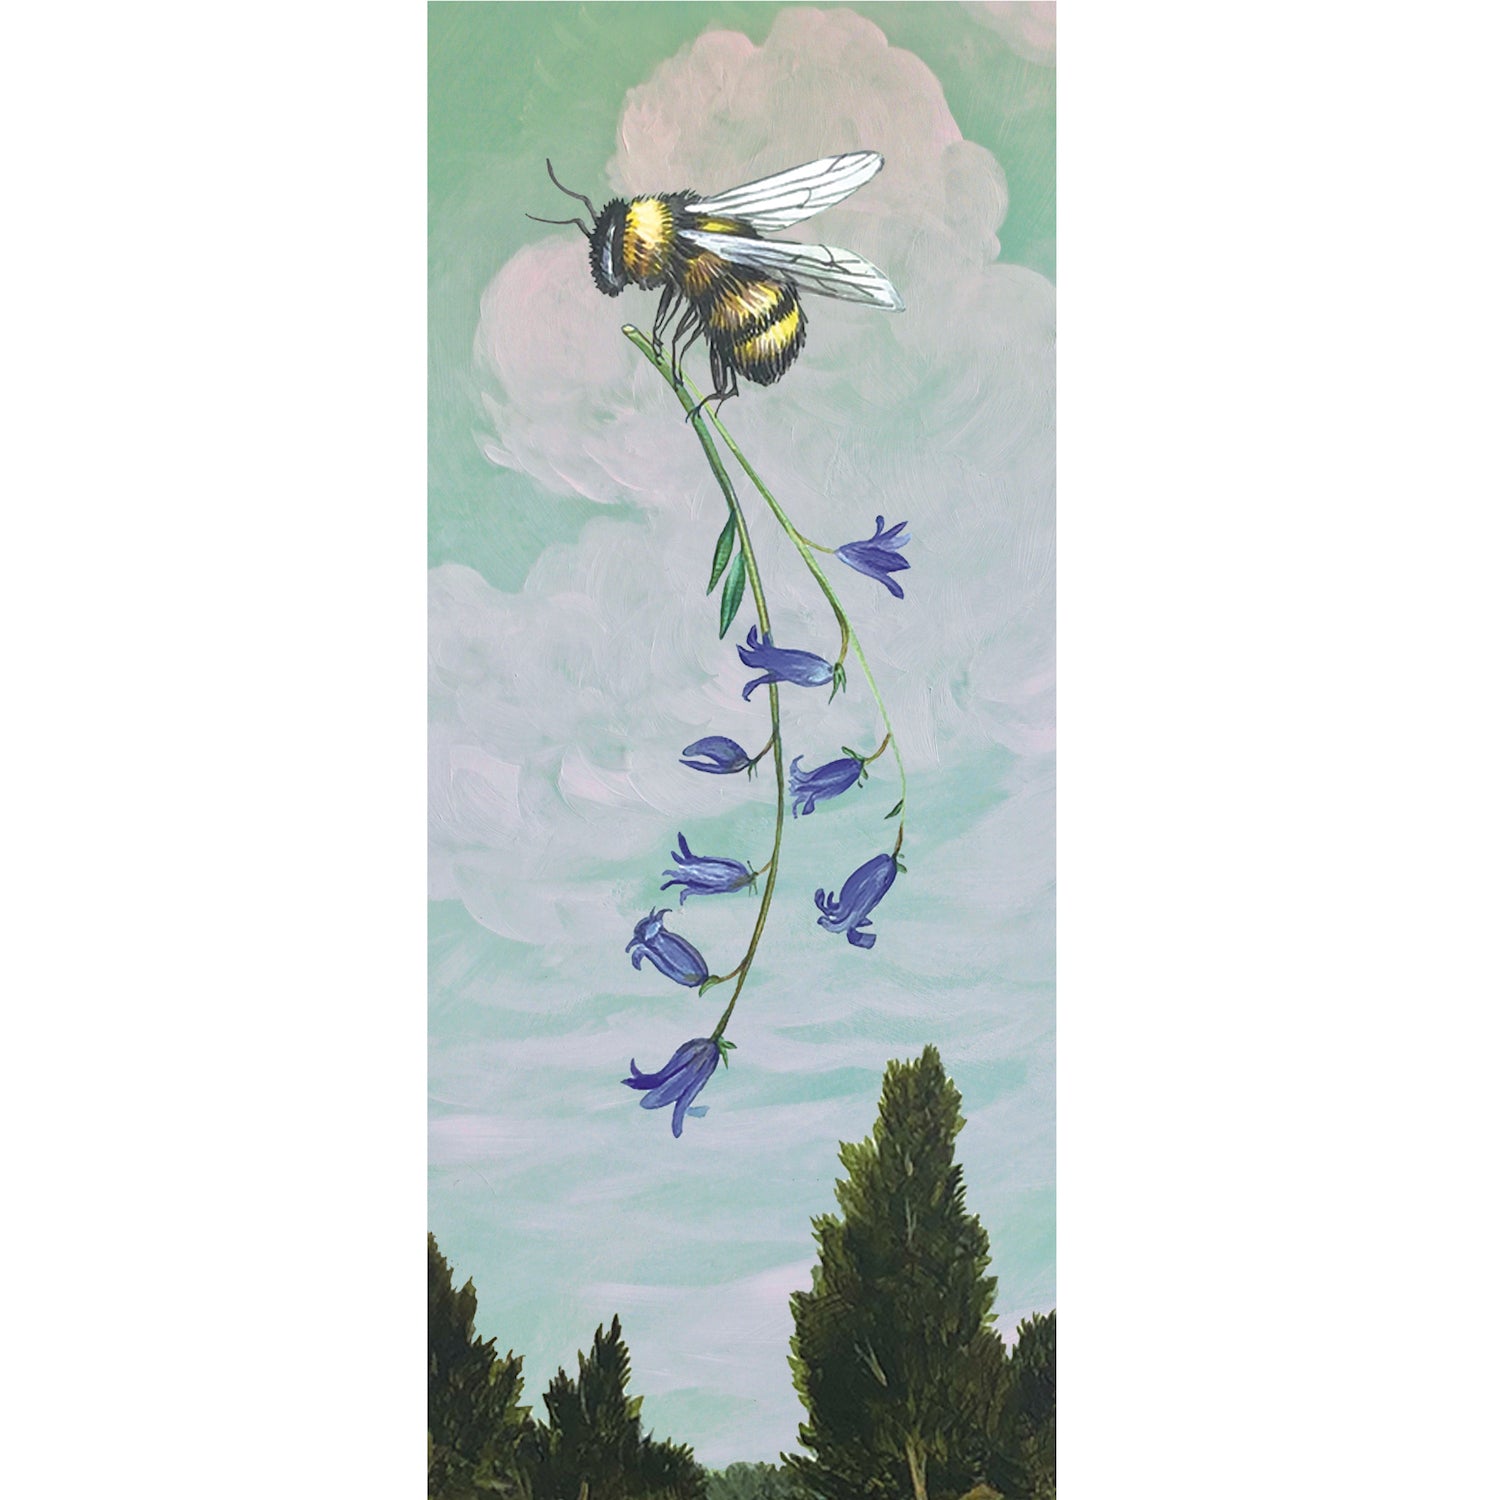 An artwork by Elizabeth Foster featuring a Bee Journey Card by Hester &amp; Cook flying over bluebells.